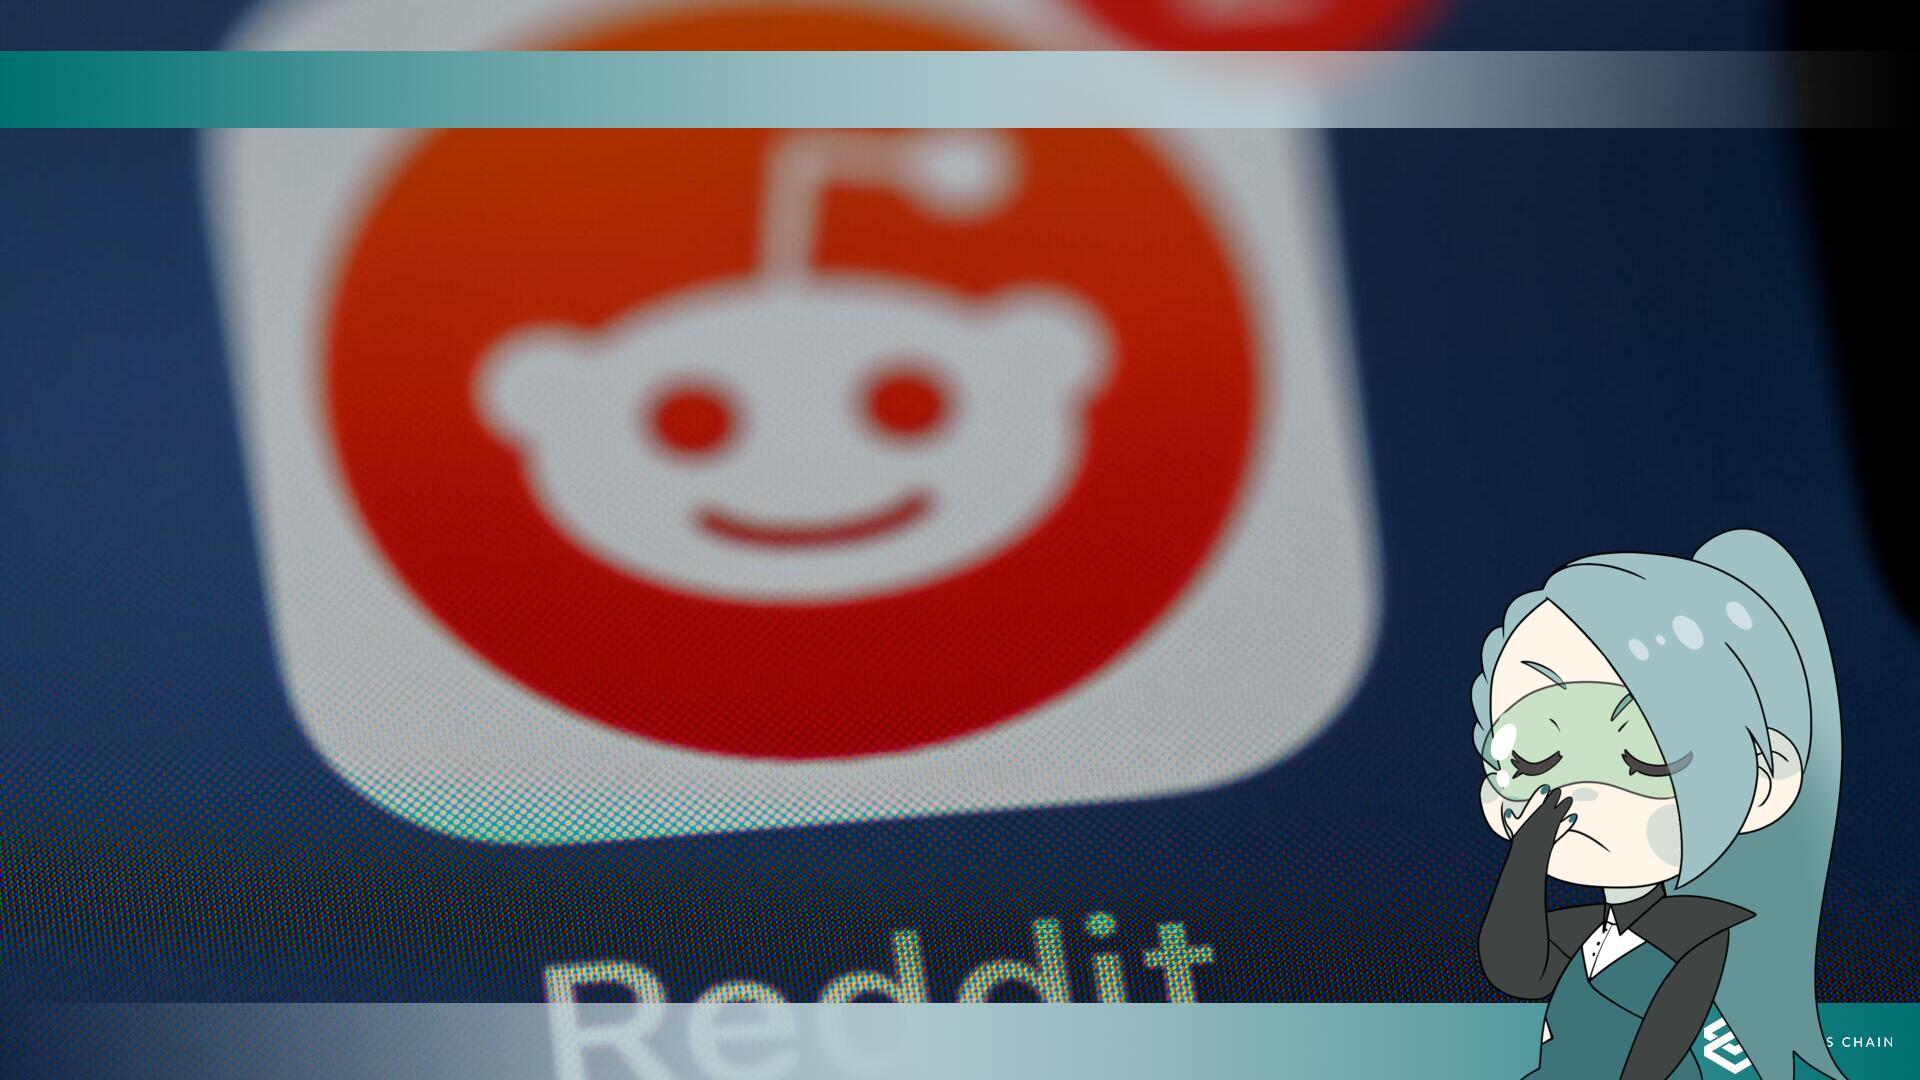  Reddit’s Sale of User Data for AI Training Draws FTC Inquiry.